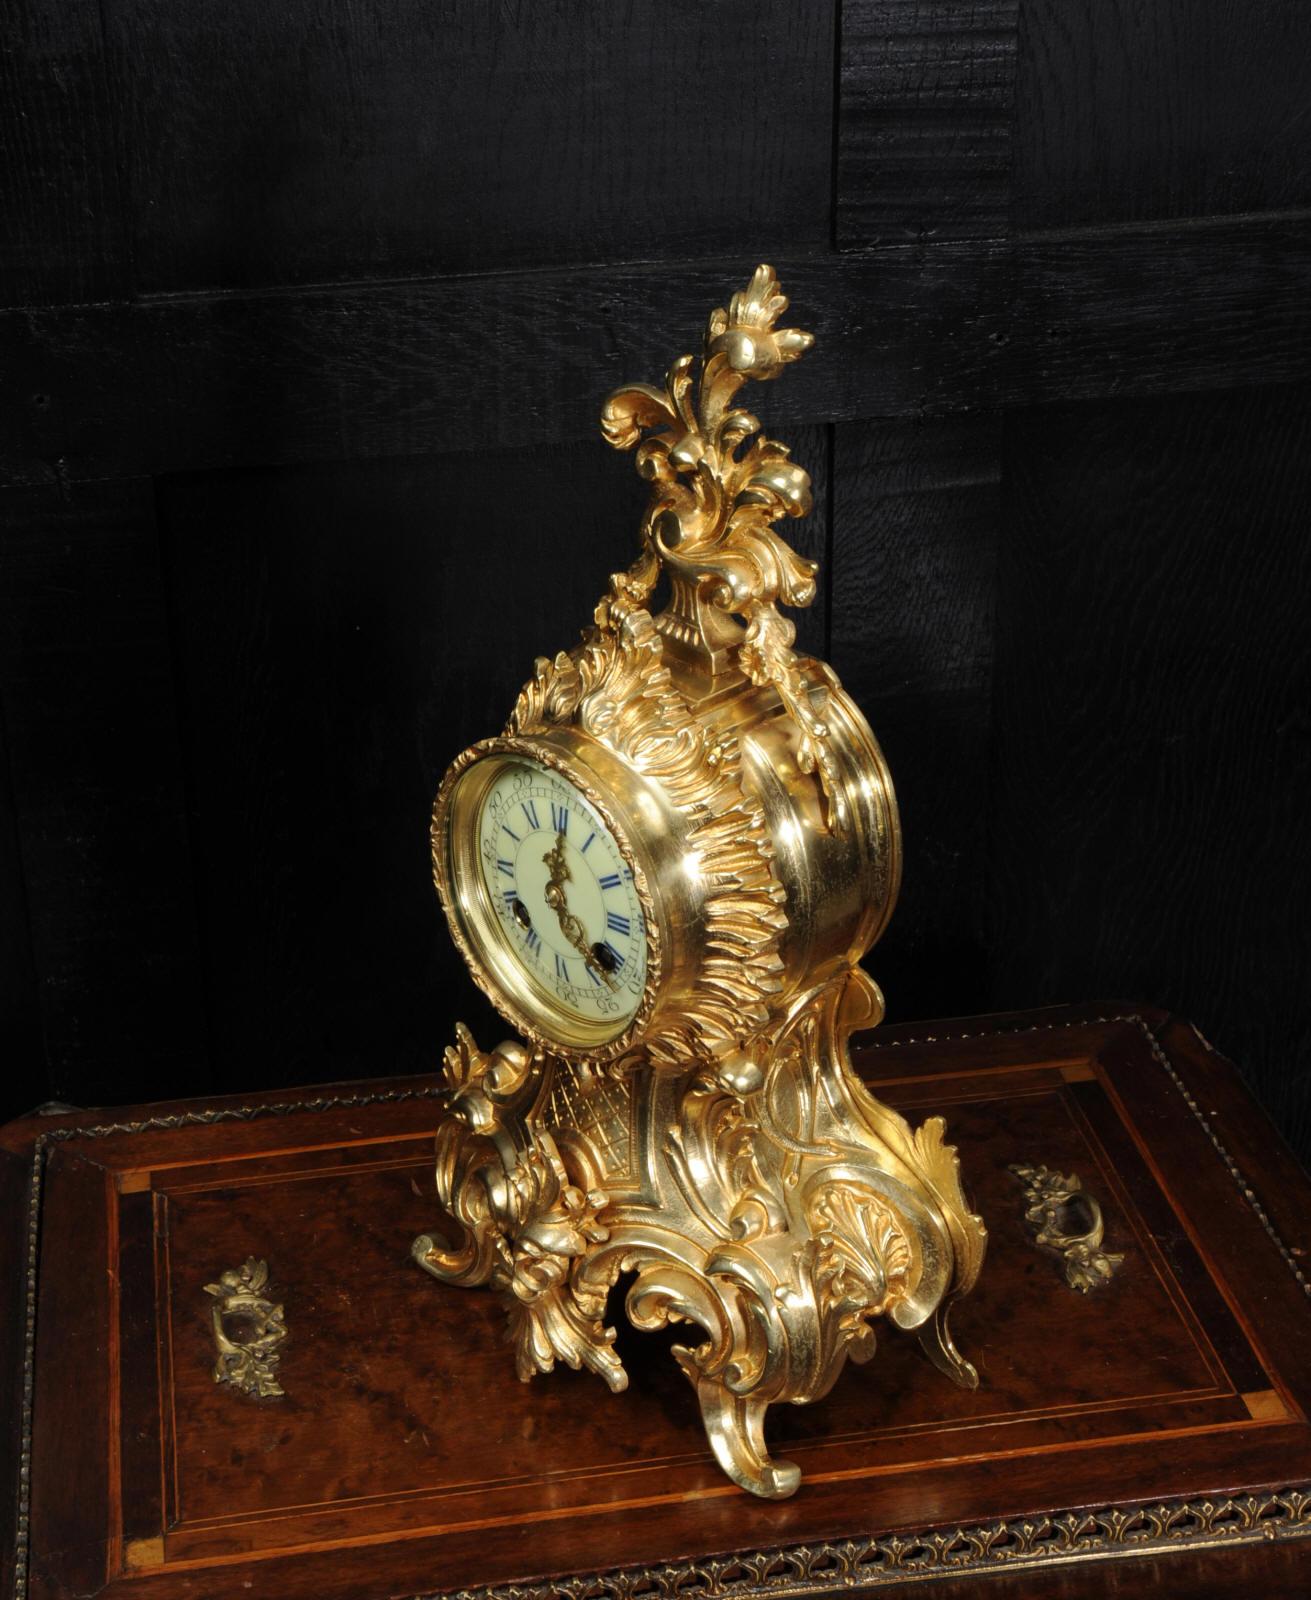 19th Century Antique French Rococo Boudoir Clock by Vincenti